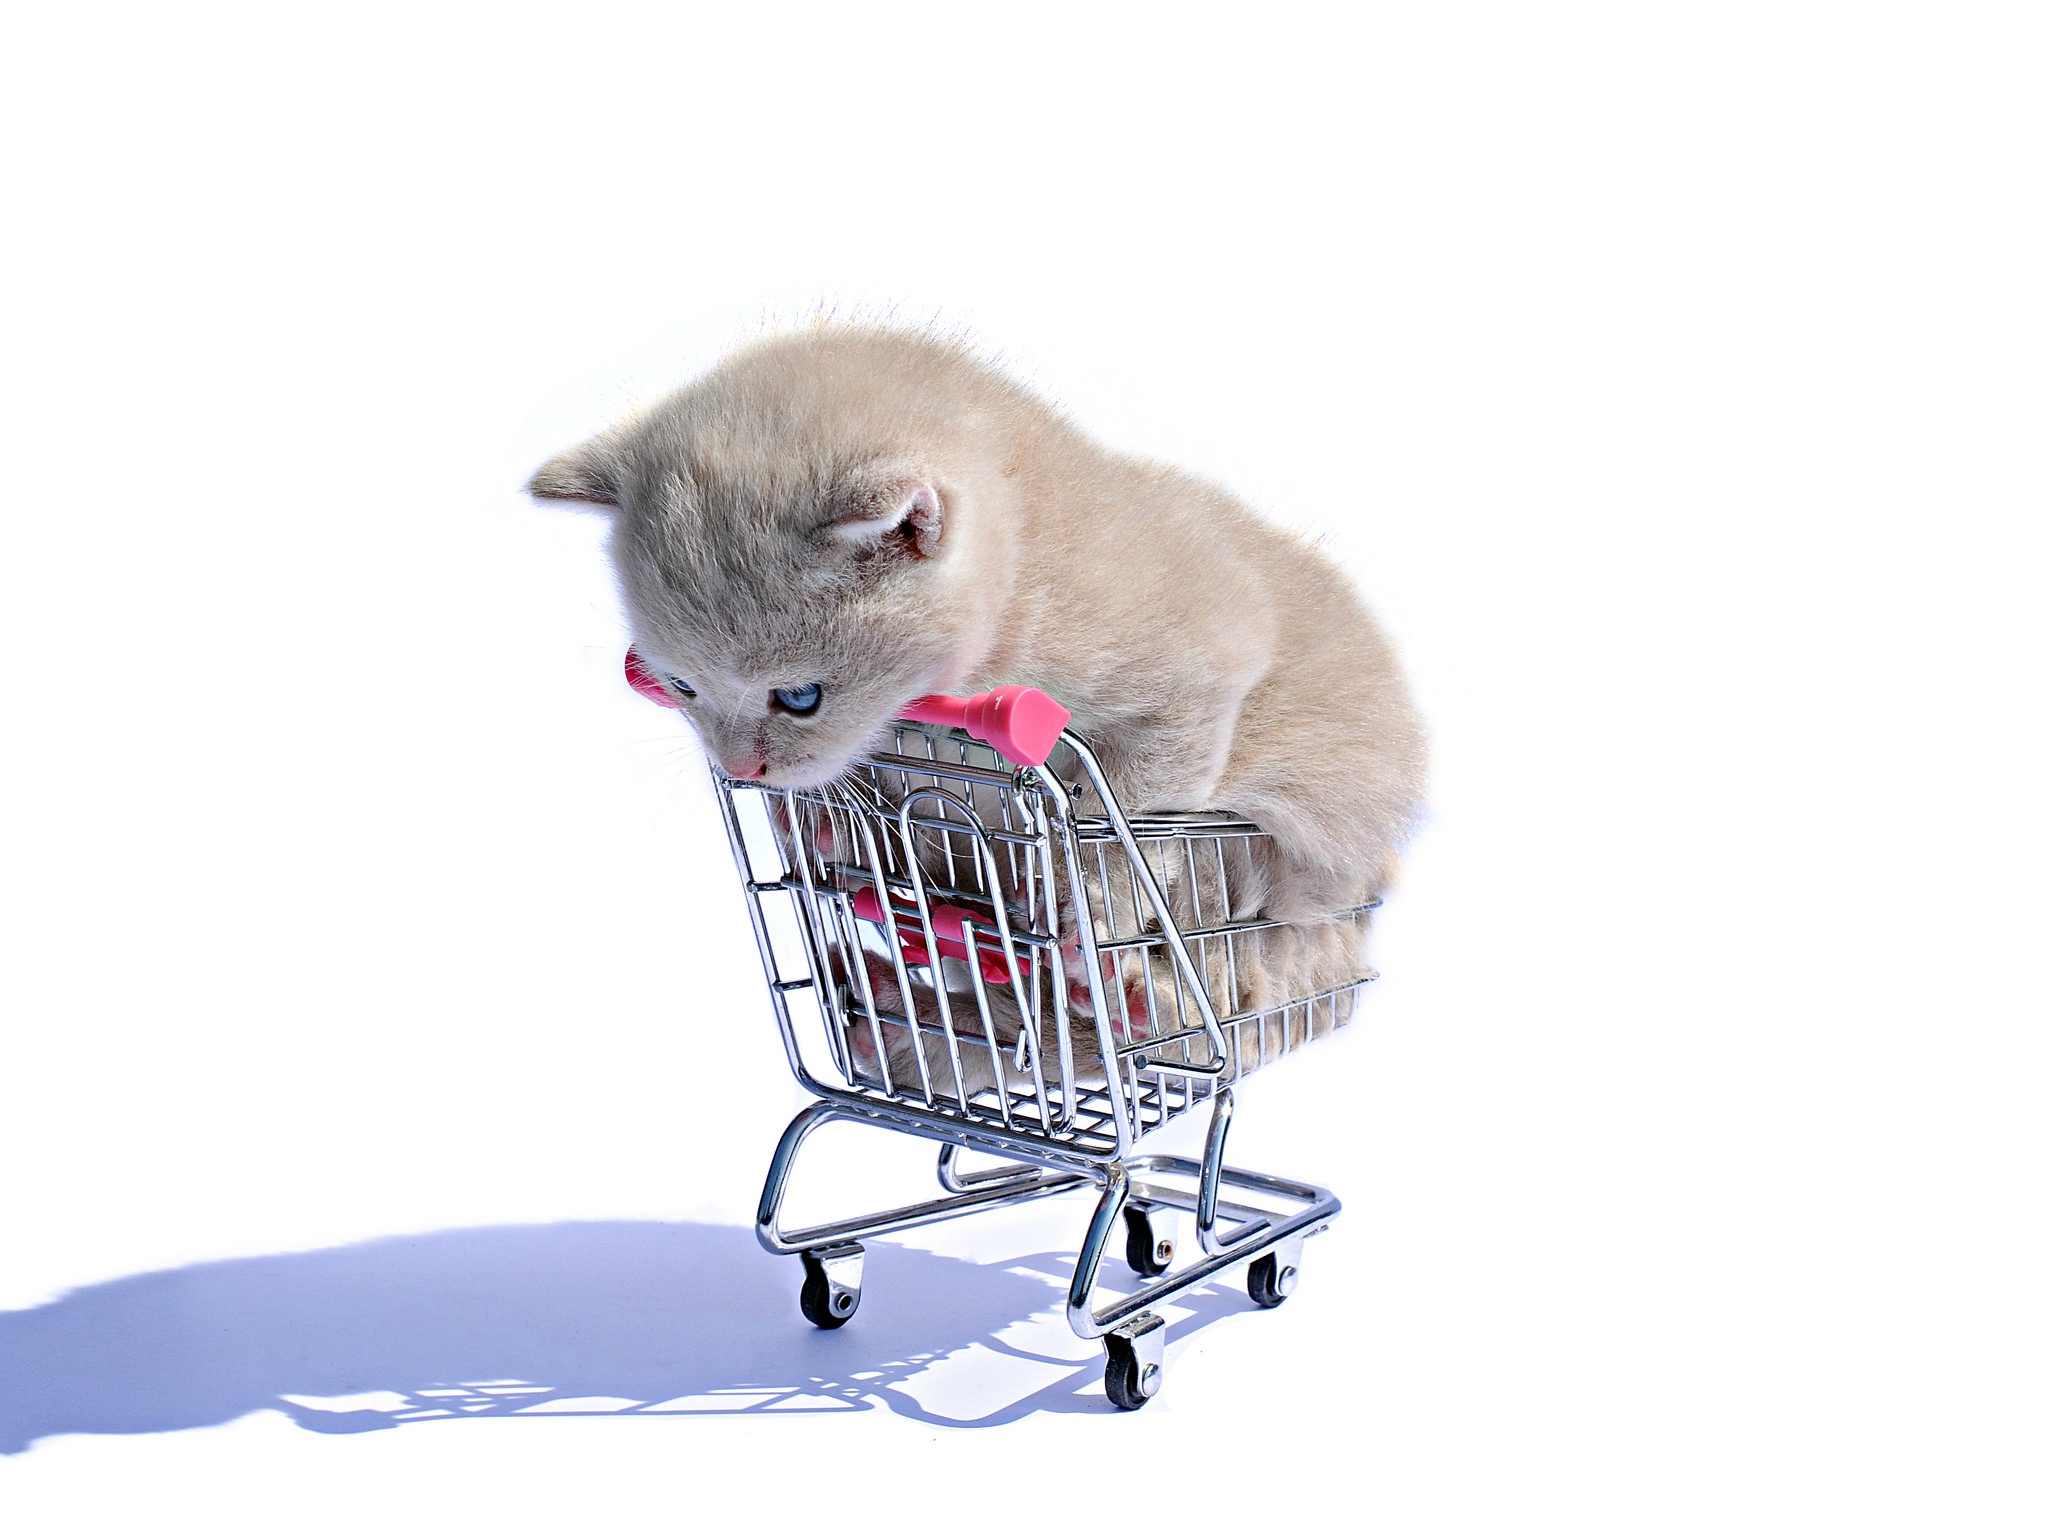 General 2048x1540 shopping cart cats white animals humor white background simple background kittens blue eyes